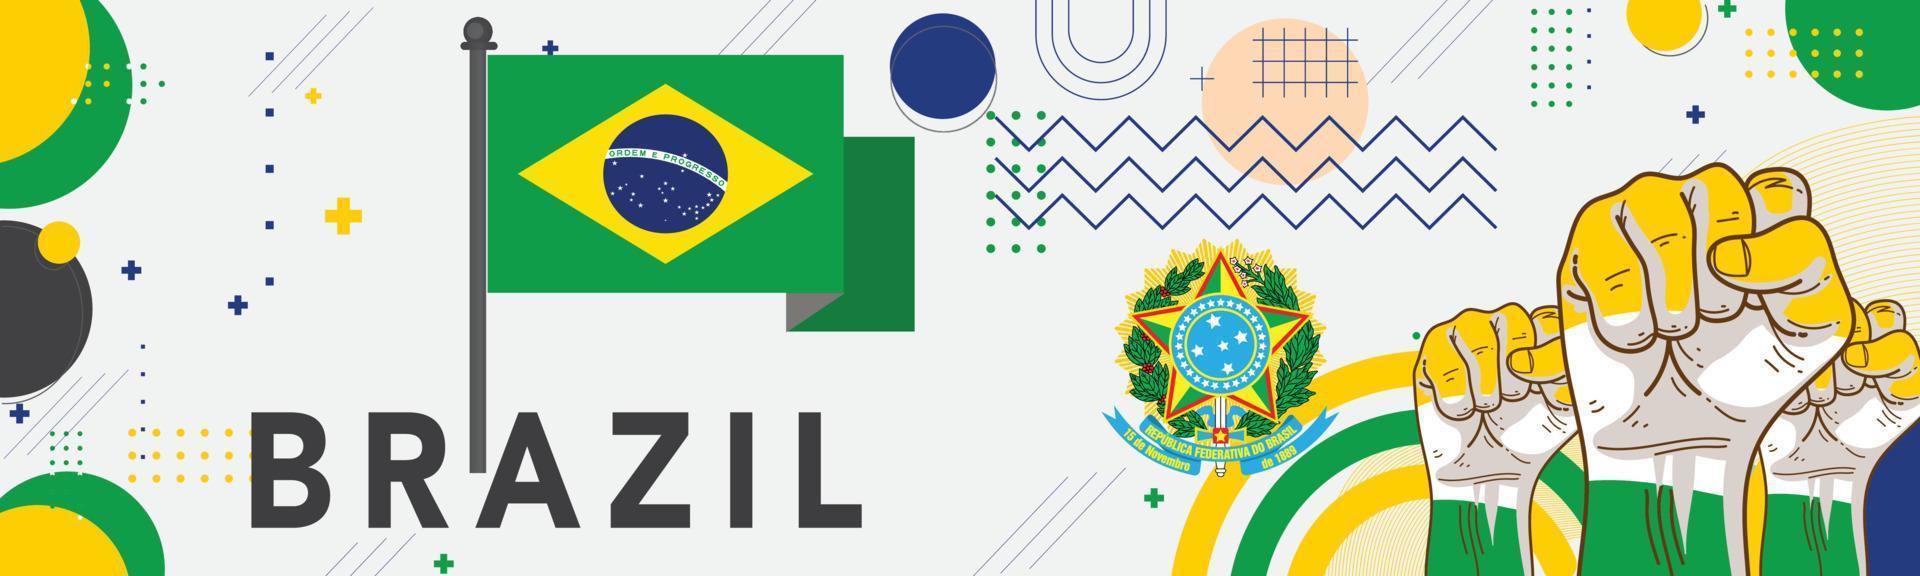 Brazil national day banner with map, flag colors theme background and geometric abstract retro modern green blue yellow design. Brazilian people. Sports Games Supporters Vector Illustration.